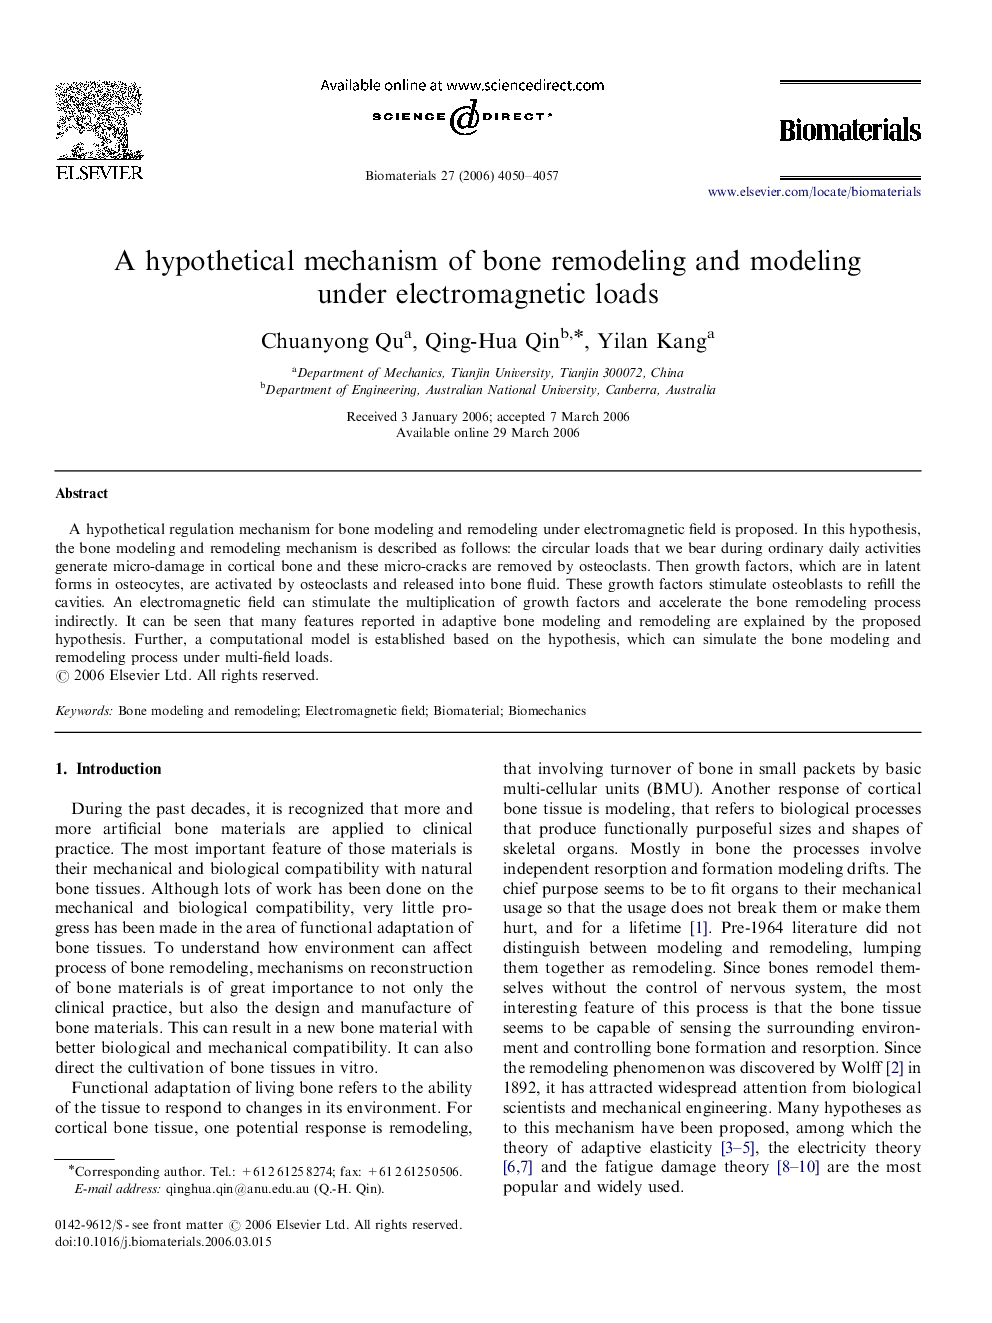 A hypothetical mechanism of bone remodeling and modeling under electromagnetic loads